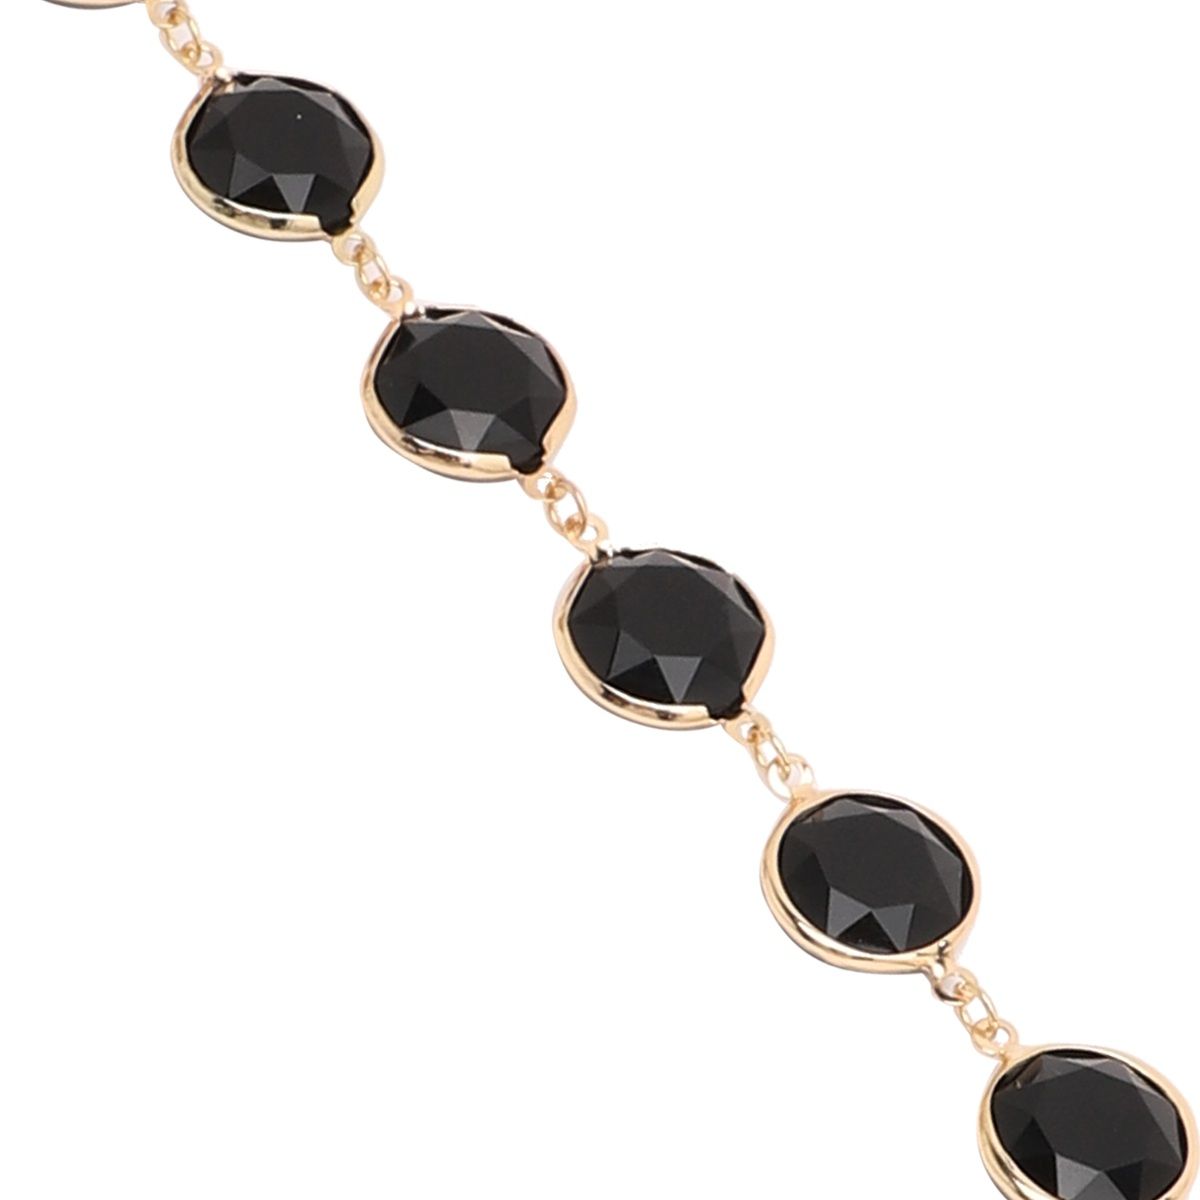 22K Yellow Gold and Black Beaded Baby Bracelet Set of 2 - BBR-478